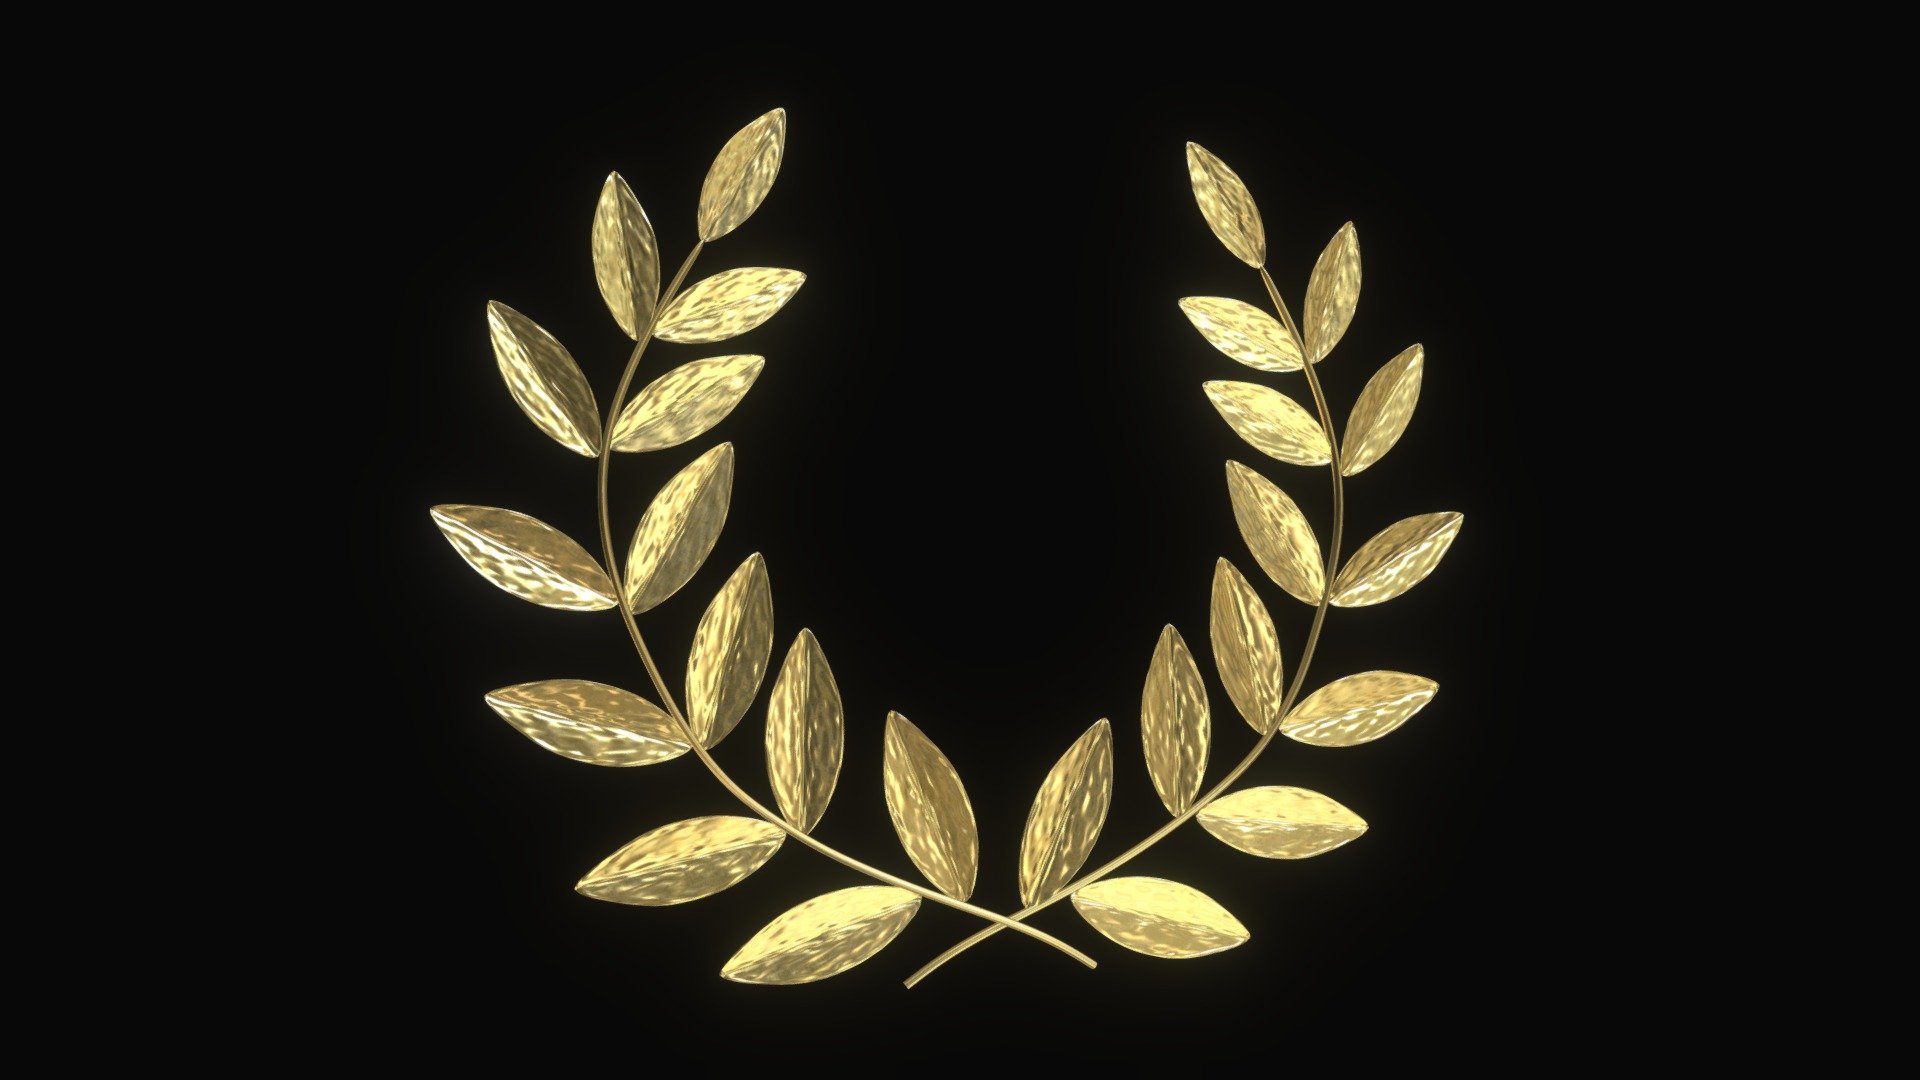 === The following description refers to the additional ZIP package provided with this model ===

Stylized laurel wreath crown 3D Model. Production-ready 3D Model, with PBR materials, textures, non overlapping UV Layout map provided in the package.

Quads only geometries (no tris/ngons).

Formats included: FBX, OBJ; scenes: BLEND (with Cycles / Eevee PBR Materials and Textures); other: png with Alpha.

1 Object (mesh), 1 PBR Material, UV unwrapped (non overlapping UV Layout map provided in the package); UV-mapped Textures.

UV Layout maps and Image Textures resolutions: 2048x2048; PBR Textures made with Substance Painter.

Polygonal, QUADS ONLY (no tris/ngons); 63808 vertices, 63752 quad faces (127504 tris).

Real world dimensions; scene scale units: cm in Blender 3.1 (that is: Metric with 0.01 scale).

Uniform scale object (scale applied in Blender 3.1) 3d model